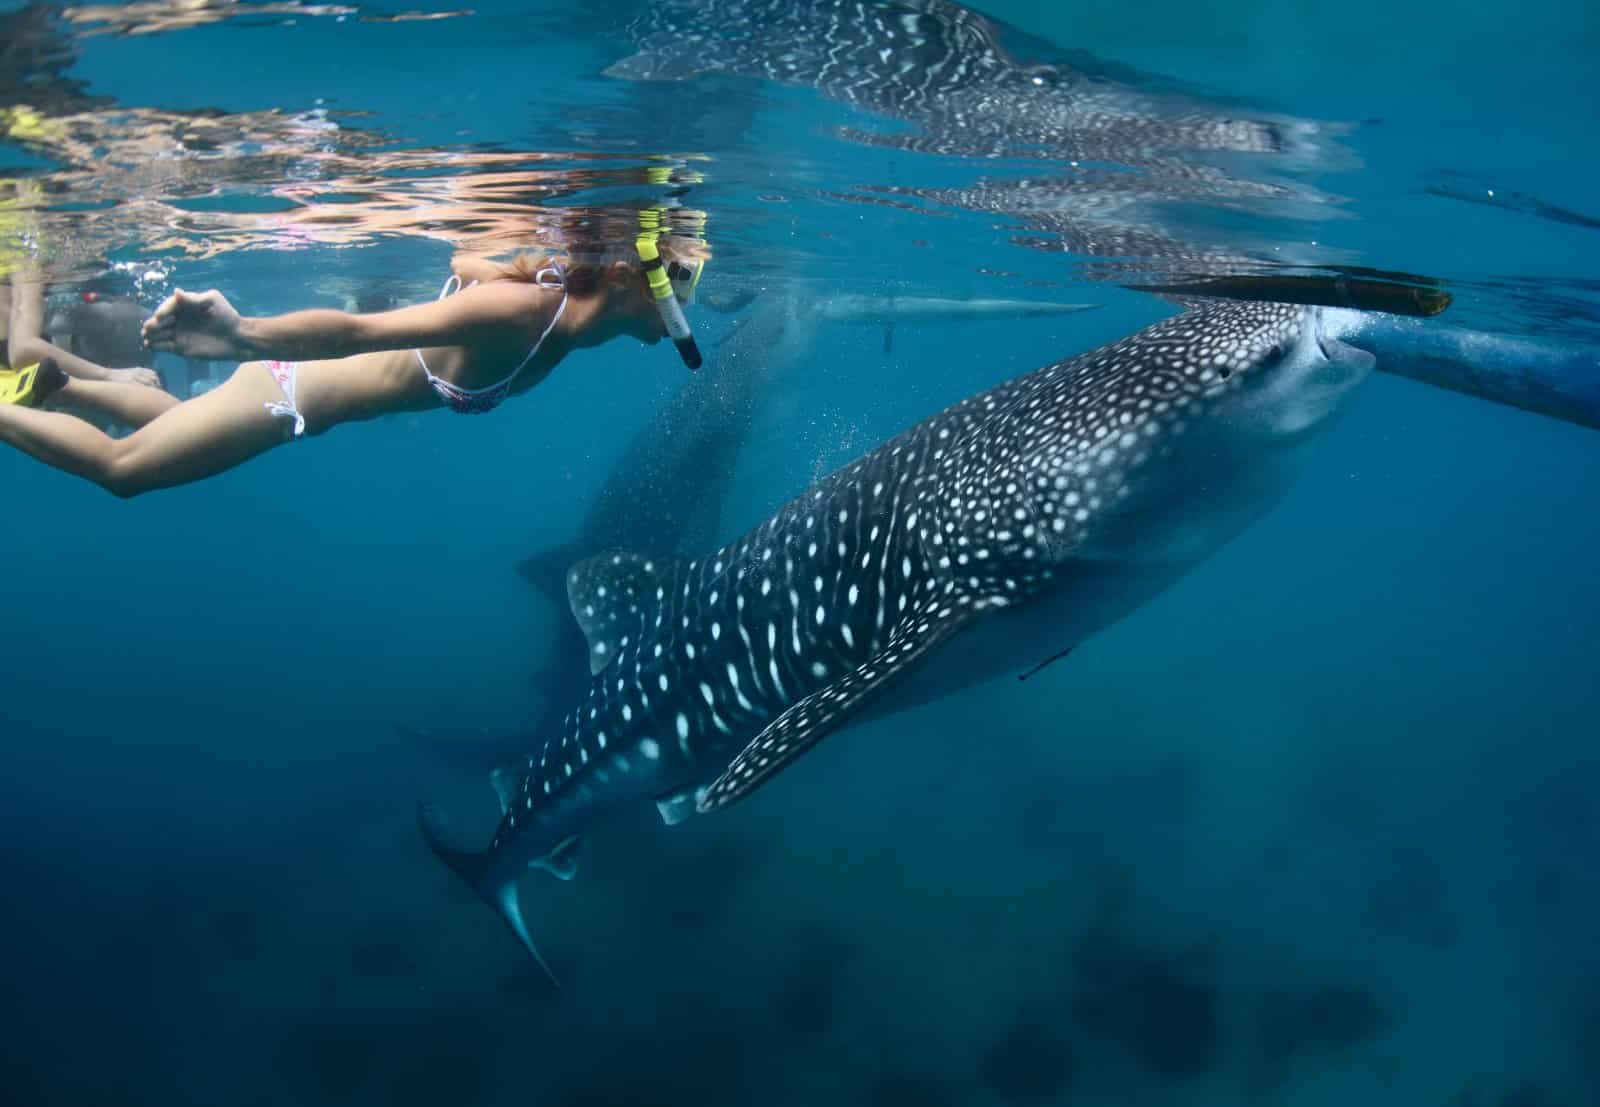 <p class="wp-caption-text">Image Credit: Shutterstock / Dudarev Mikhail</p>  <p><span>The Bay of Donsol is renowned for allowing snorkelers to swim with whale sharks, the largest fish in the sea. These gentle giants frequent the waters of Donsol from November to June, attracted by the abundance of plankton.</span></p> <p><span>Snorkeling with whale sharks in Donsol is regulated to ensure the safety of both the animals and snorkelers, providing a responsible wildlife encounter that is both thrilling and respectful.</span></p> <p><b>Insider’s Tip: </b><span>Opt for a morning snorkeling session when whale shark sightings are most frequent and the water conditions are ideal.</span></p> <p><b>When to Travel: </b><span>Visit between November and June for the best chance to snorkel with whale sharks, with peak sightings from February to May.</span></p> <p><b>How to Get There: </b><span>Fly to Legazpi City from Manila, then travel by road to Donsol, which takes approximately 1.5 hours.</span></p>